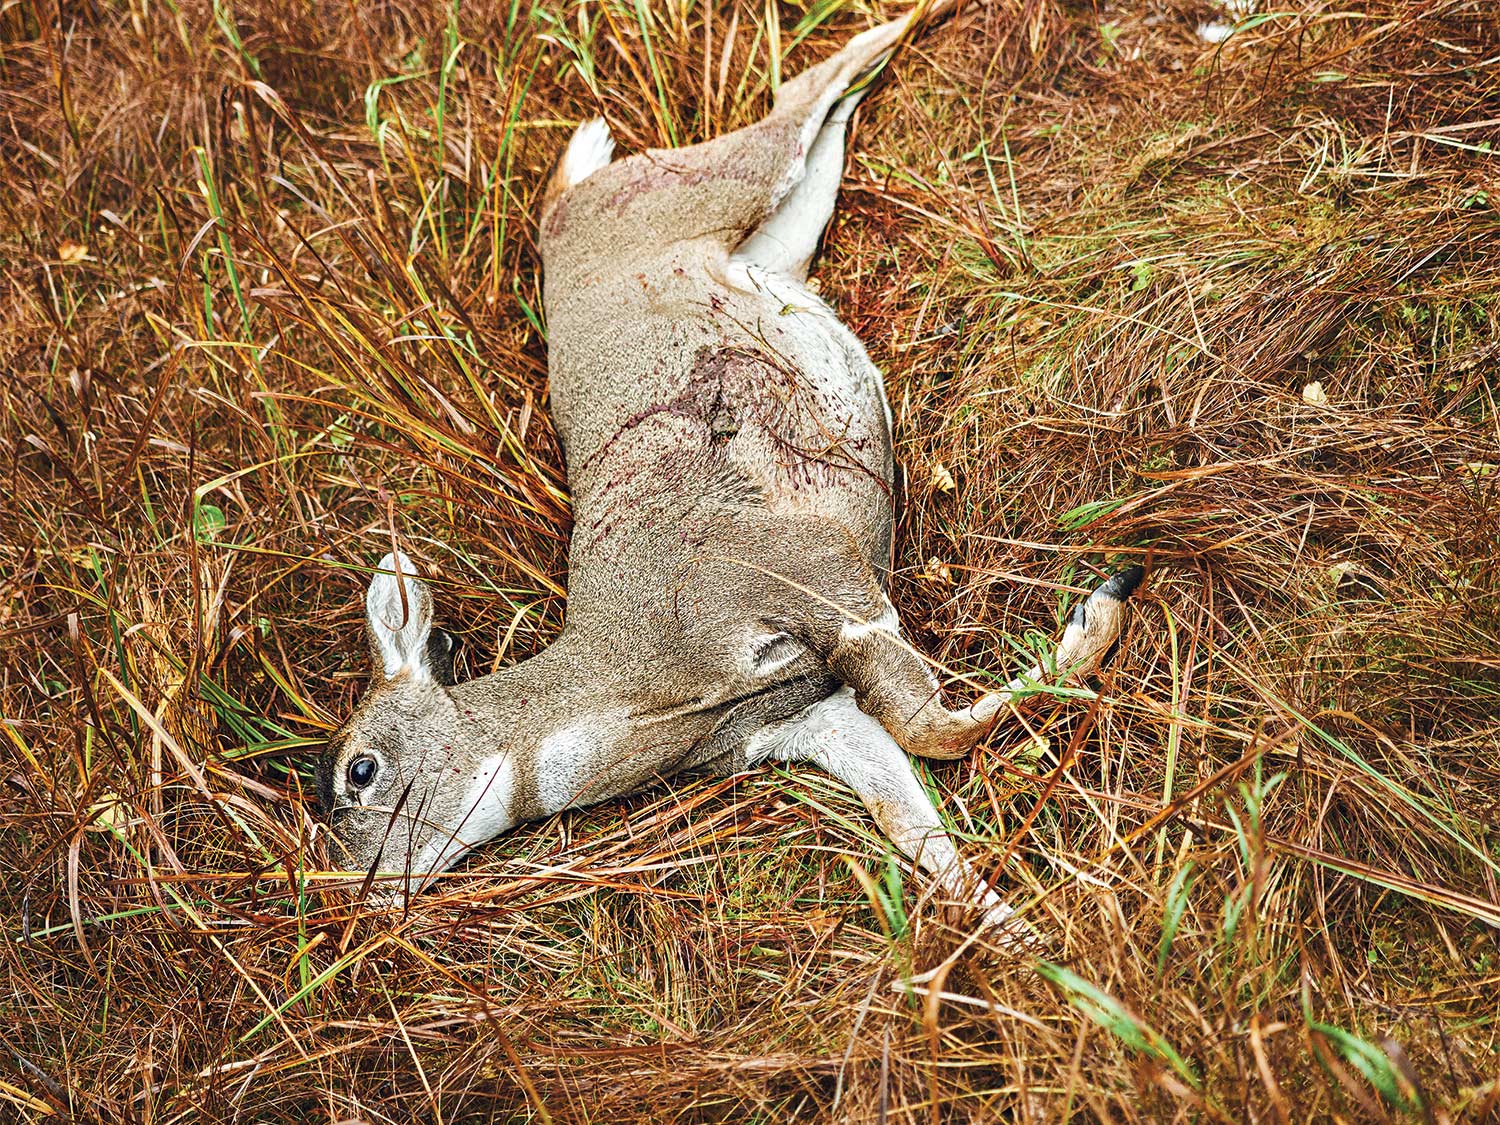 A blacktail deer down in Tongass National Forest.